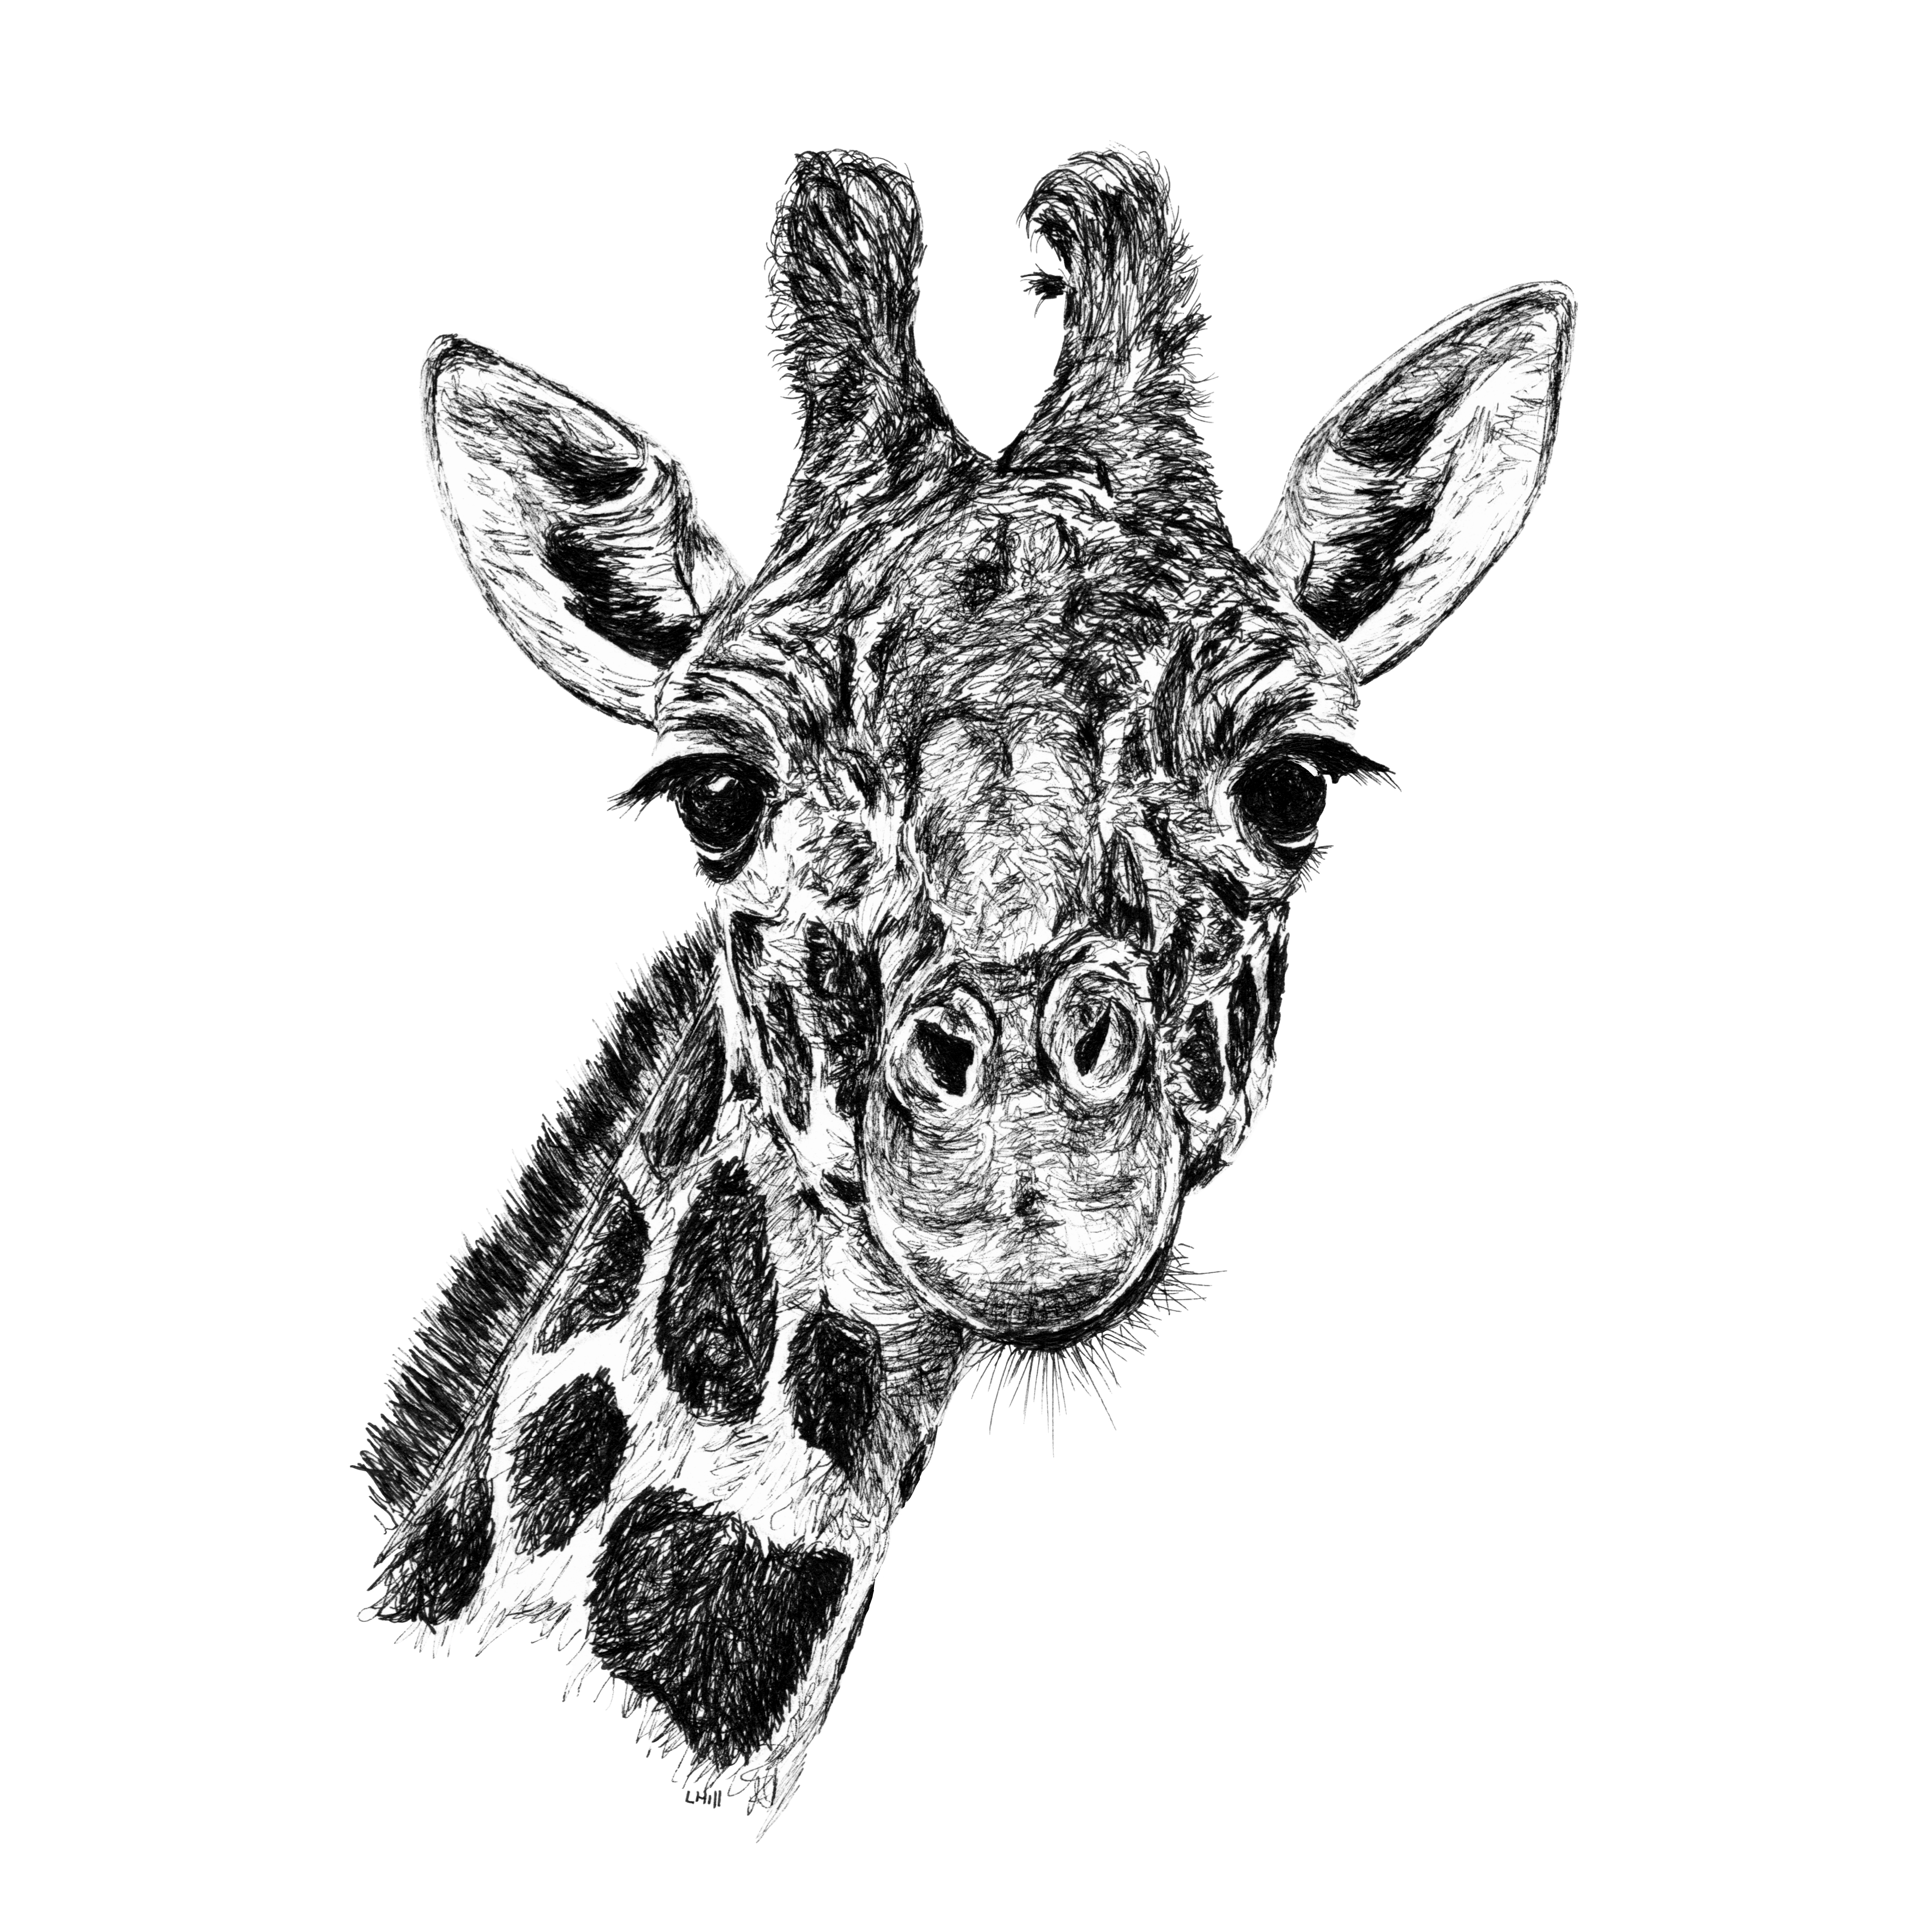 Giraffe pen and ink illustration by Louisa Hill